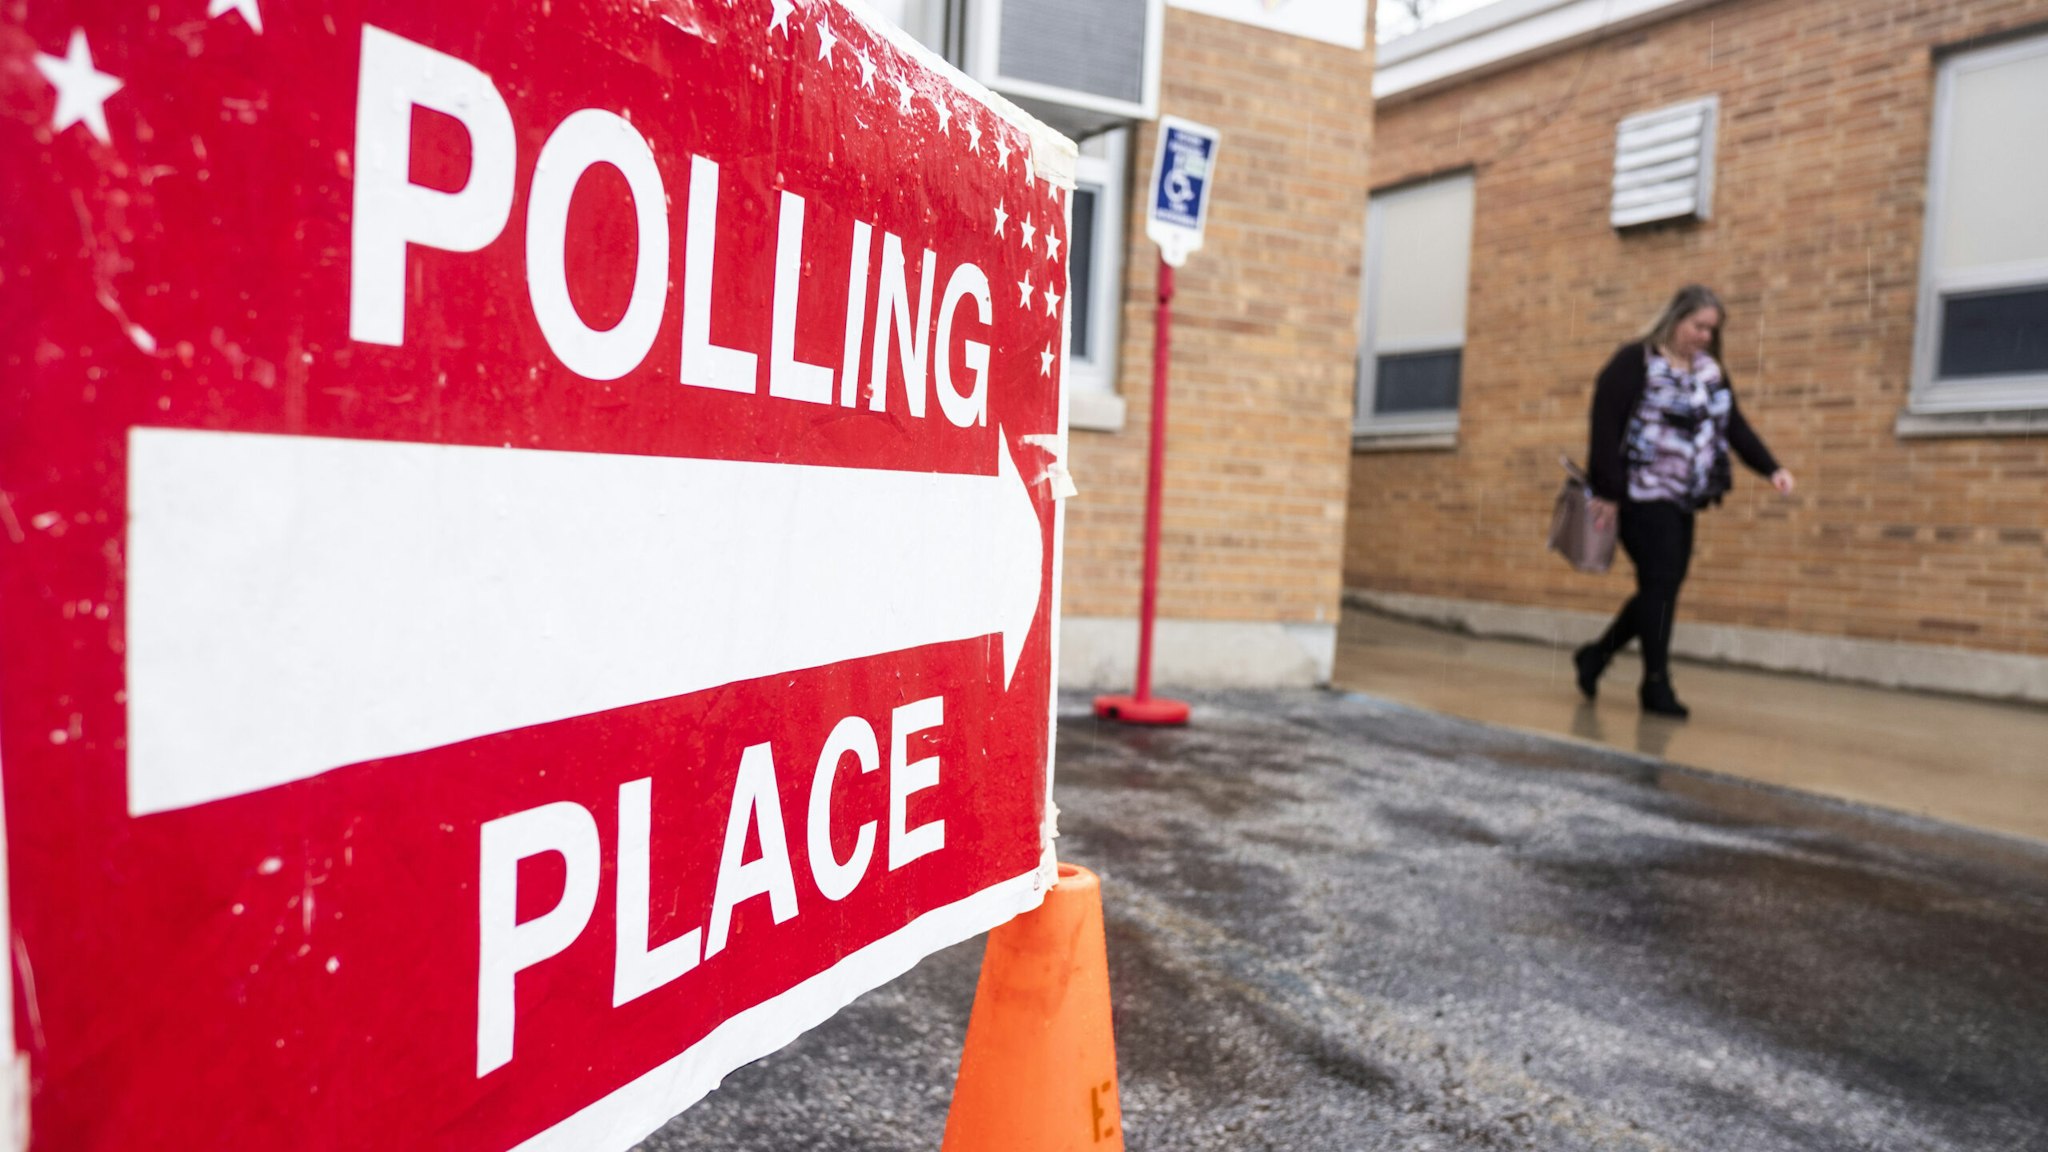 A "Polling Place" sign in Toledo, Ohio, U.S., on Tuesday, May 3, 2022. The first major test of Donald Trump's hold on Republican voters is set for Tuesday, when a crowded and acrimonious U.S. Senate primary contest that centered largely on the former president comes to a close.